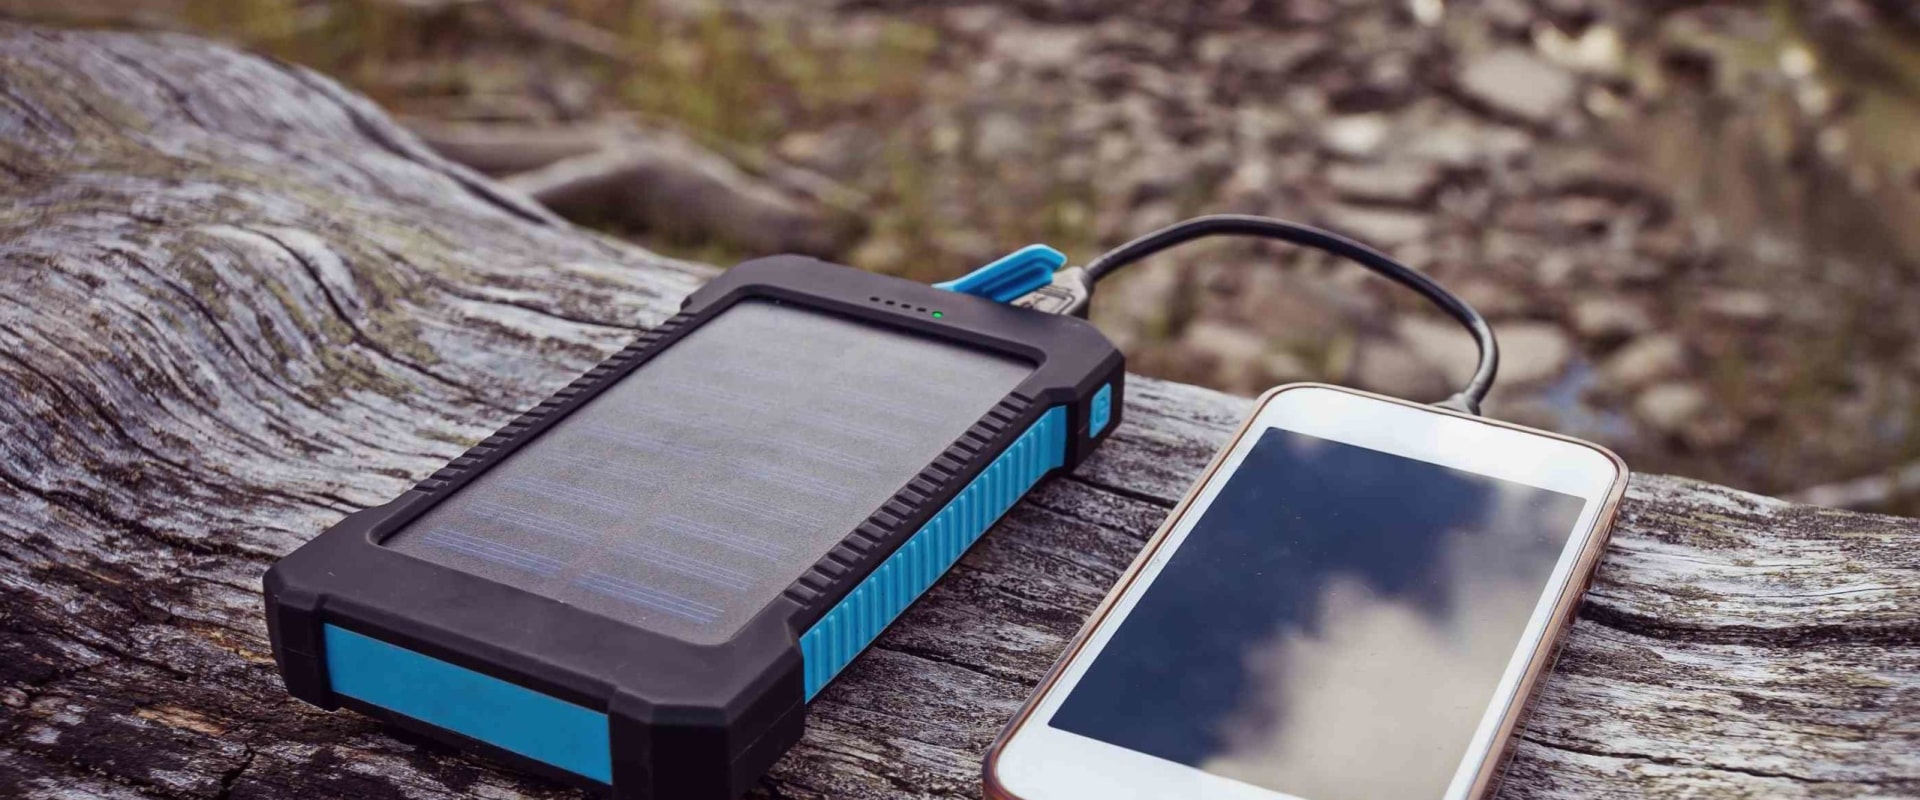 Do power banks with solar panels work?